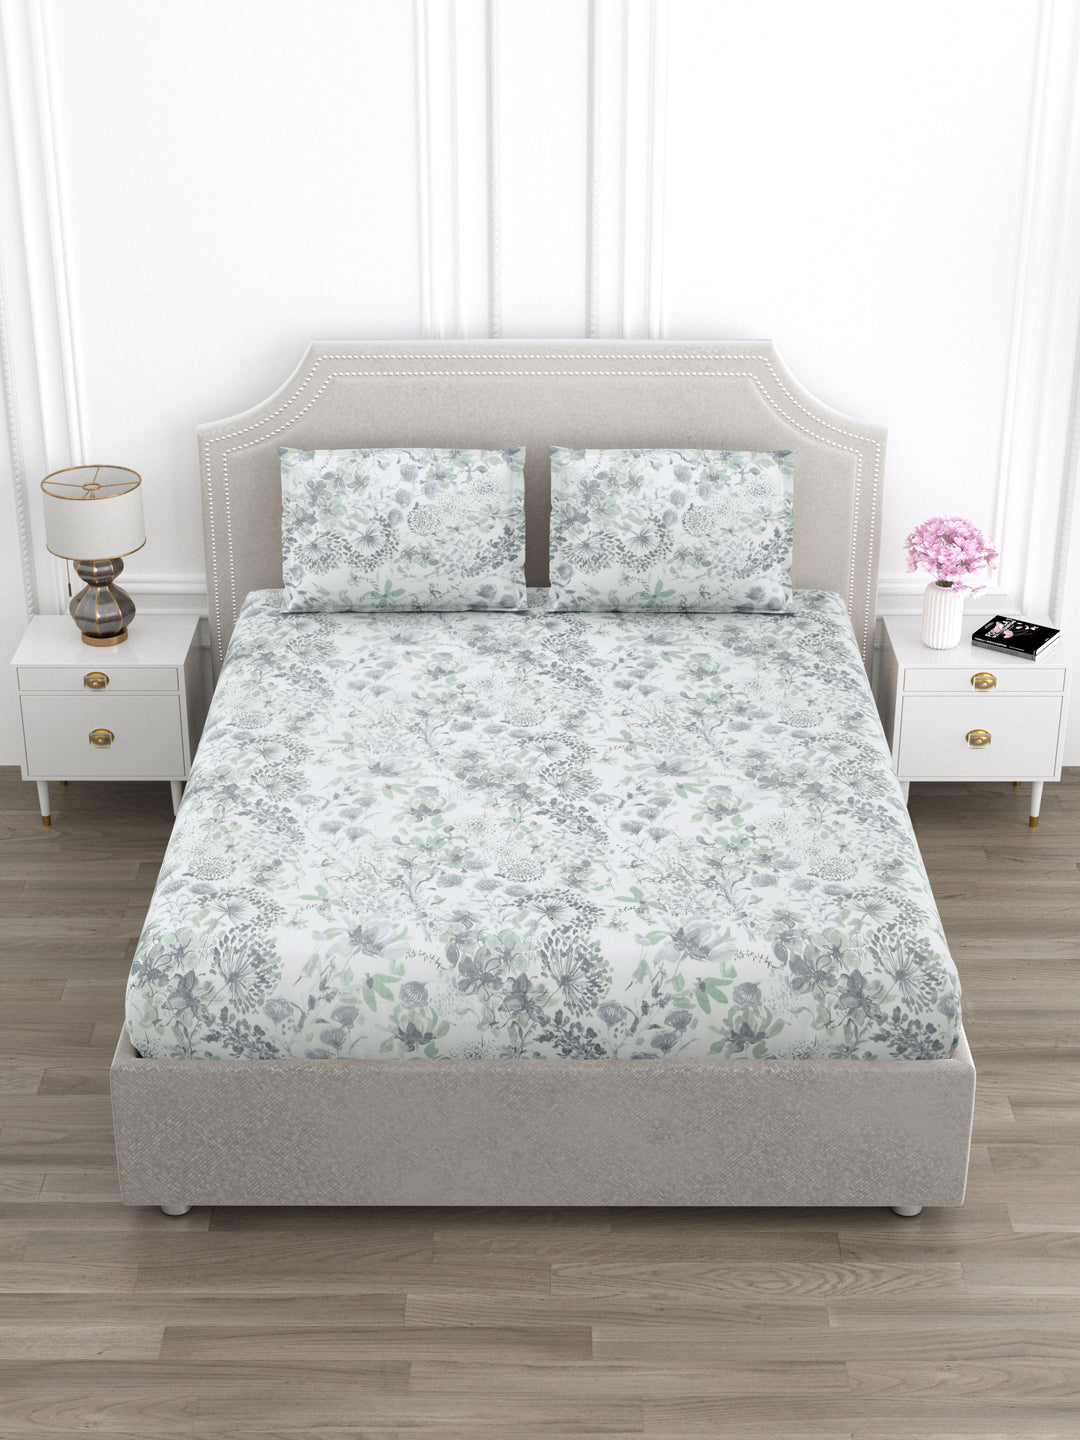 Green & Grey Floral King Size Bed Cotton Linen